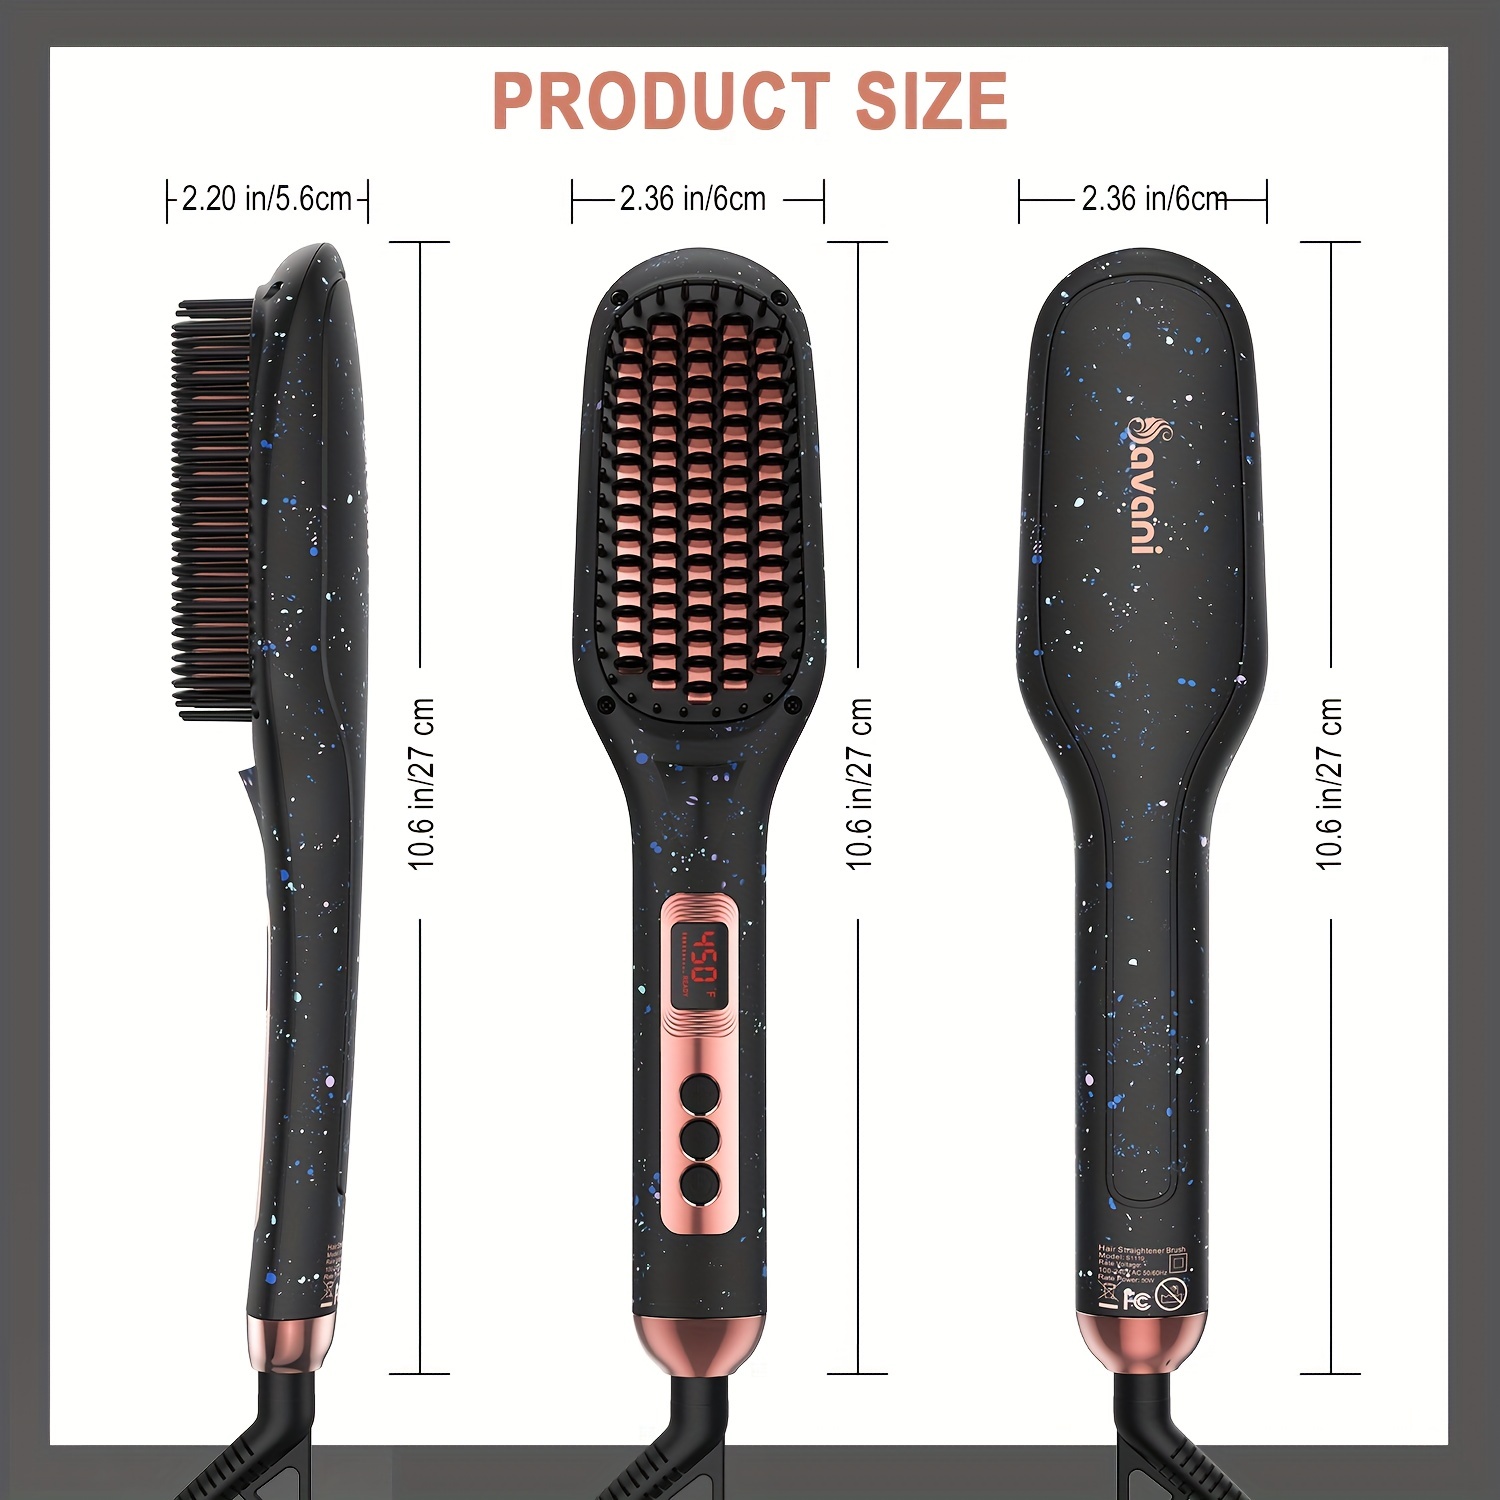 savani hair straightener brush fast heating ceramic negative ion hair straightening comb electric hot hair brush curly thick hair styling tool auto off anti scald multiple temp settings details 0